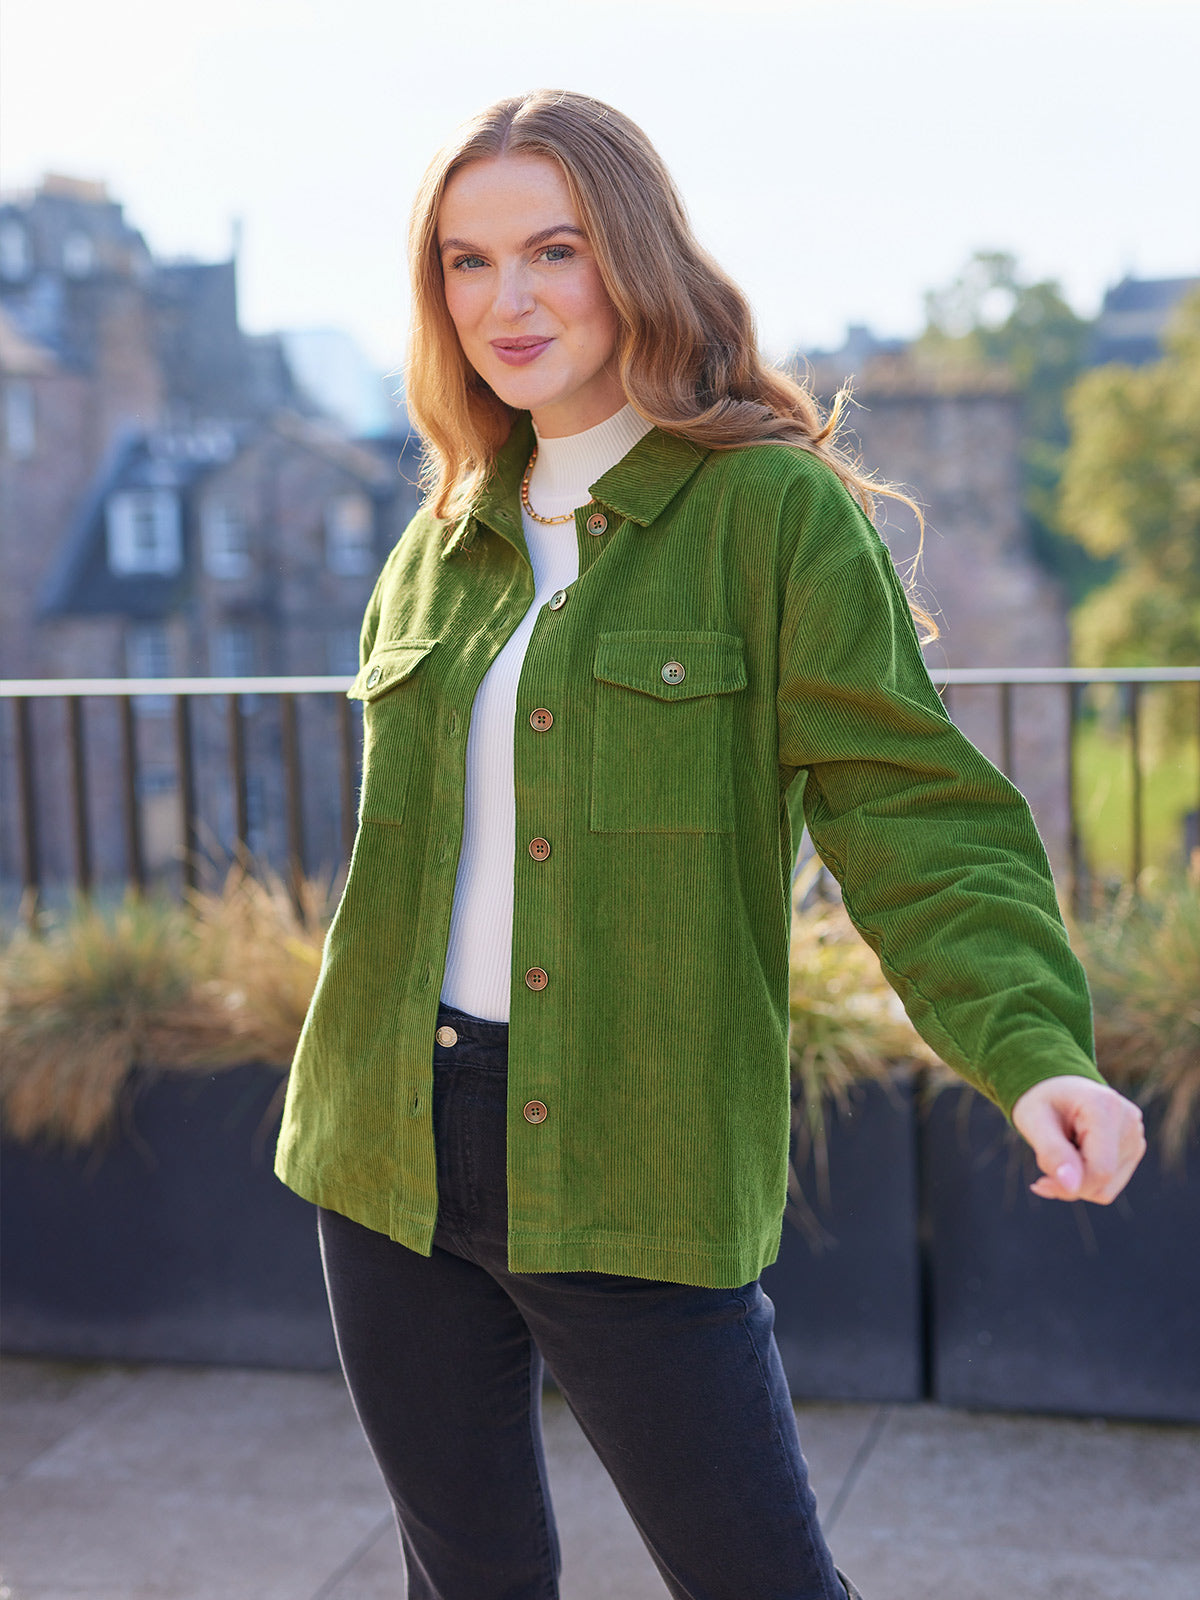 A model looking at the camera wearing the sustainable Yasmynn shacket in olive, paired with a white top and black trousers. Pictured in front of buildings outside with natural light.